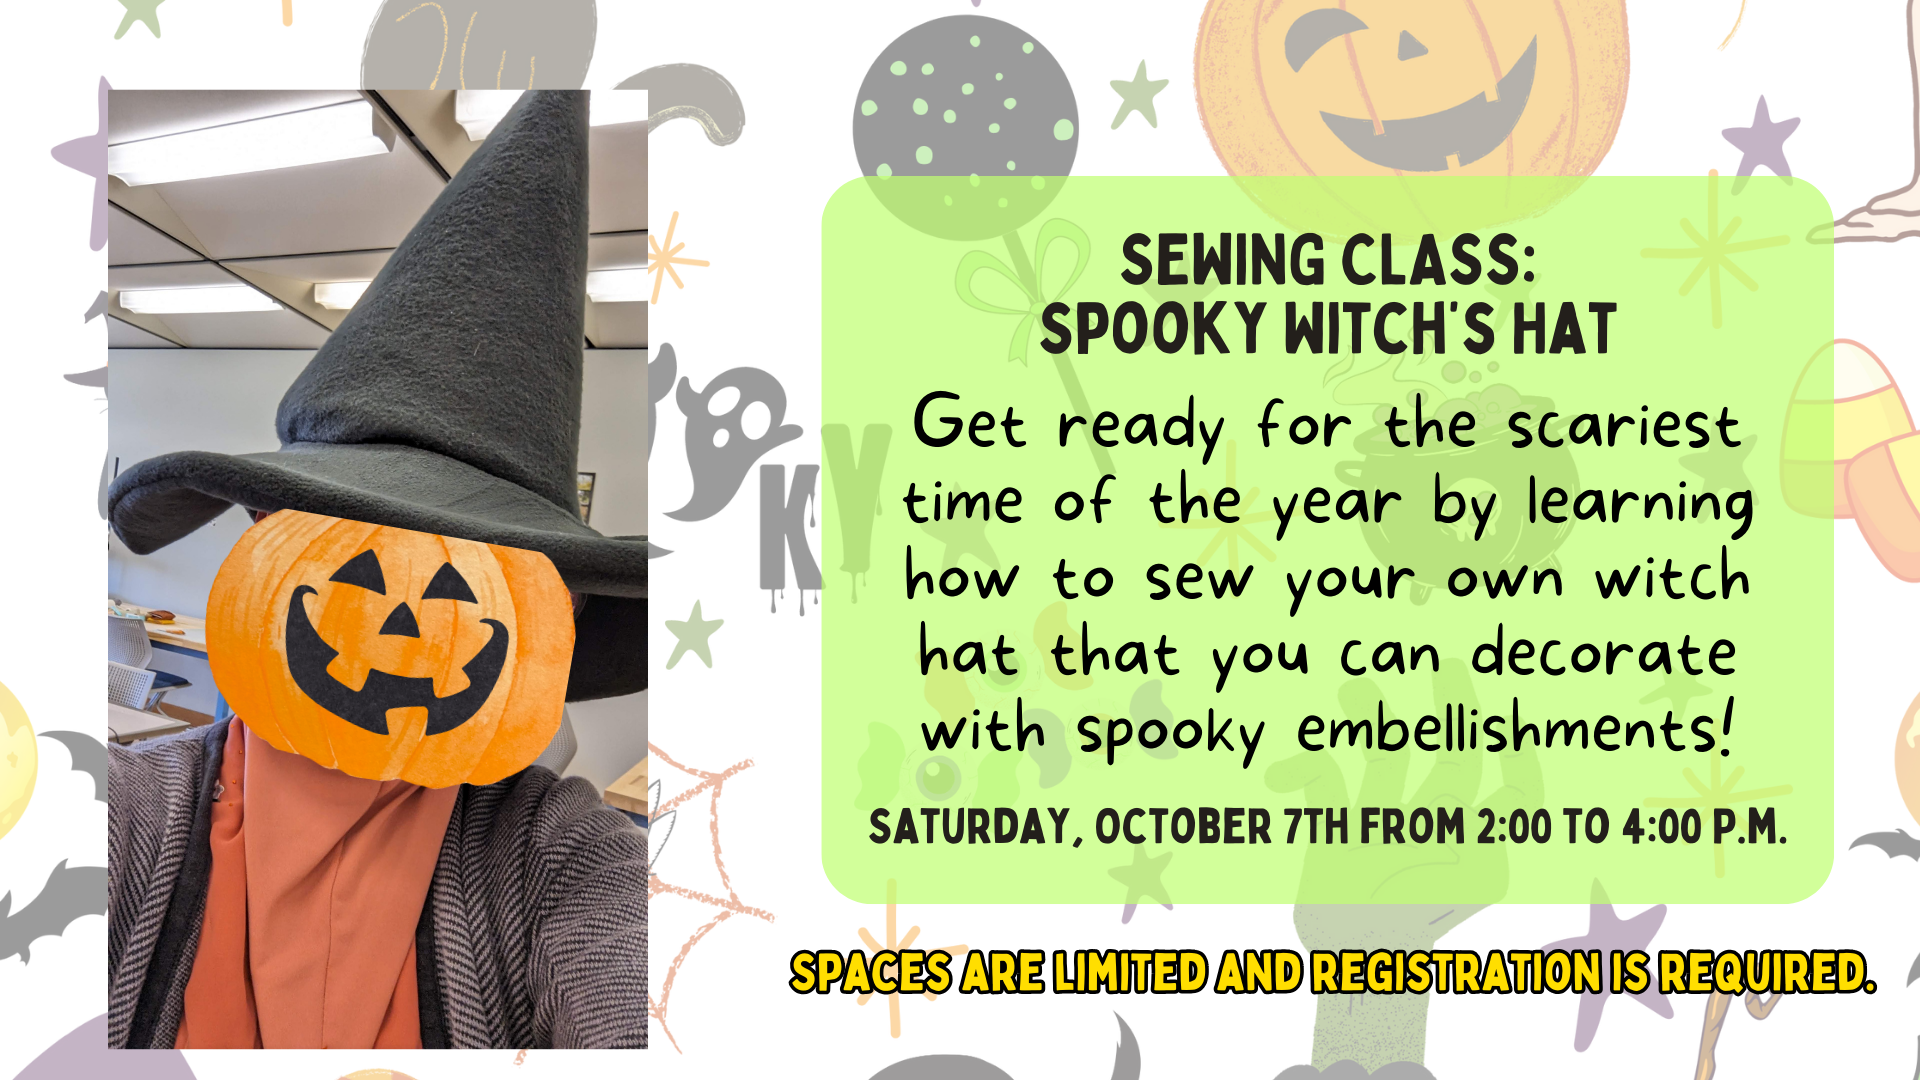 Promotional image for Spooky Witch's Sewing Hat class to be held on Saturday October 7th 2023